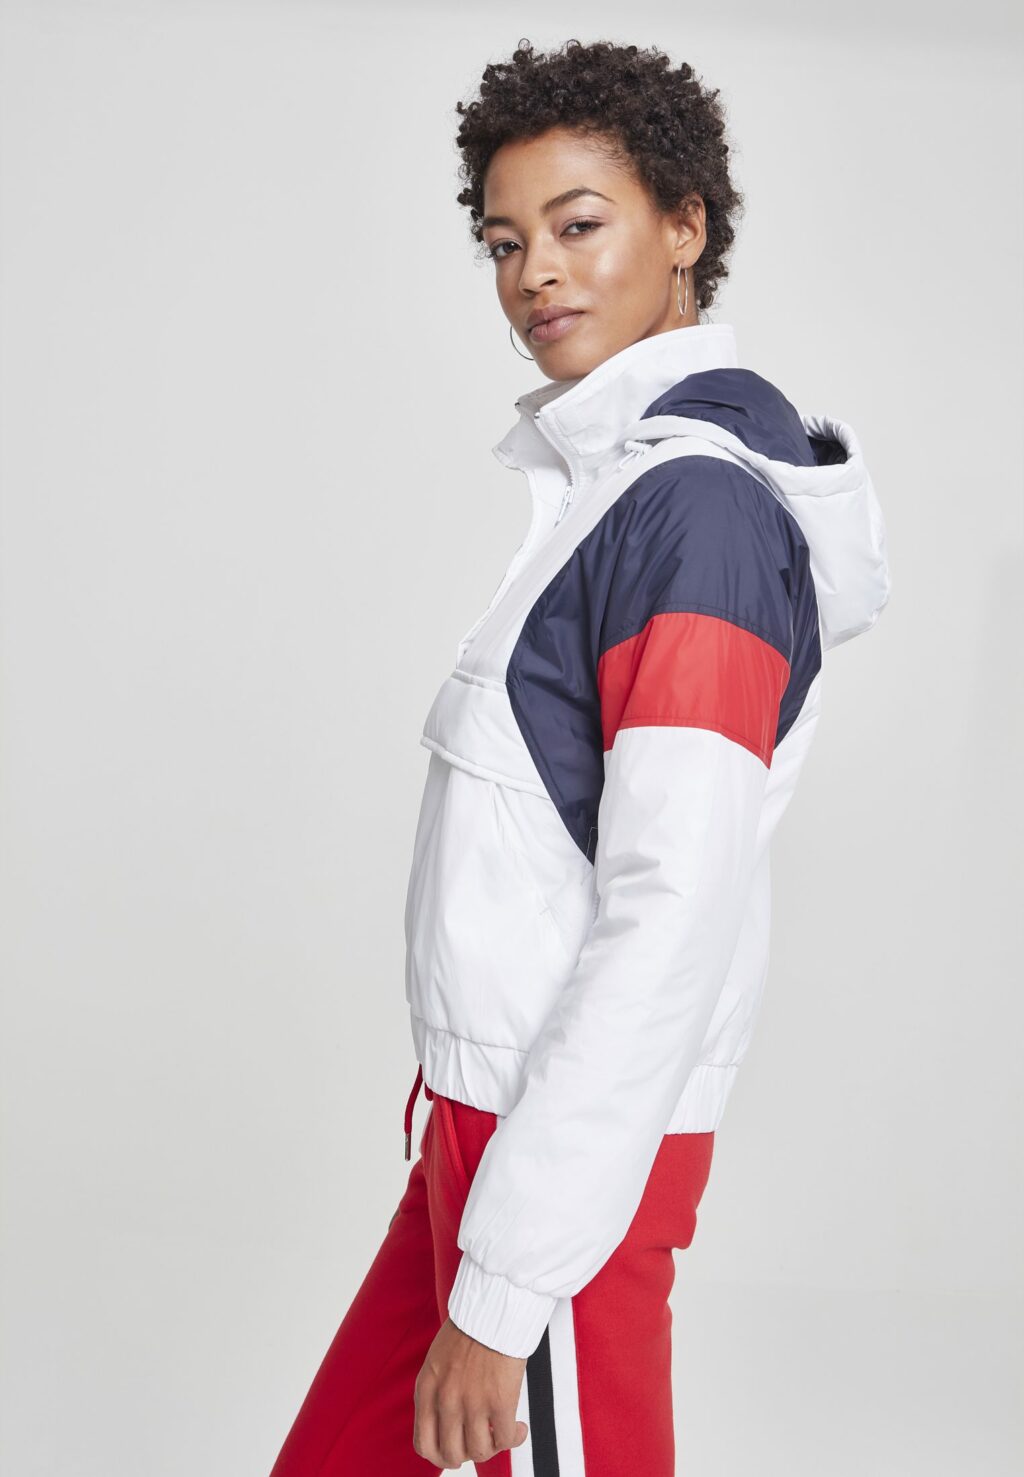 Urban Classics Ladies 3-Tone Padded Pull Over Jacket white/navy/fire red TB2445